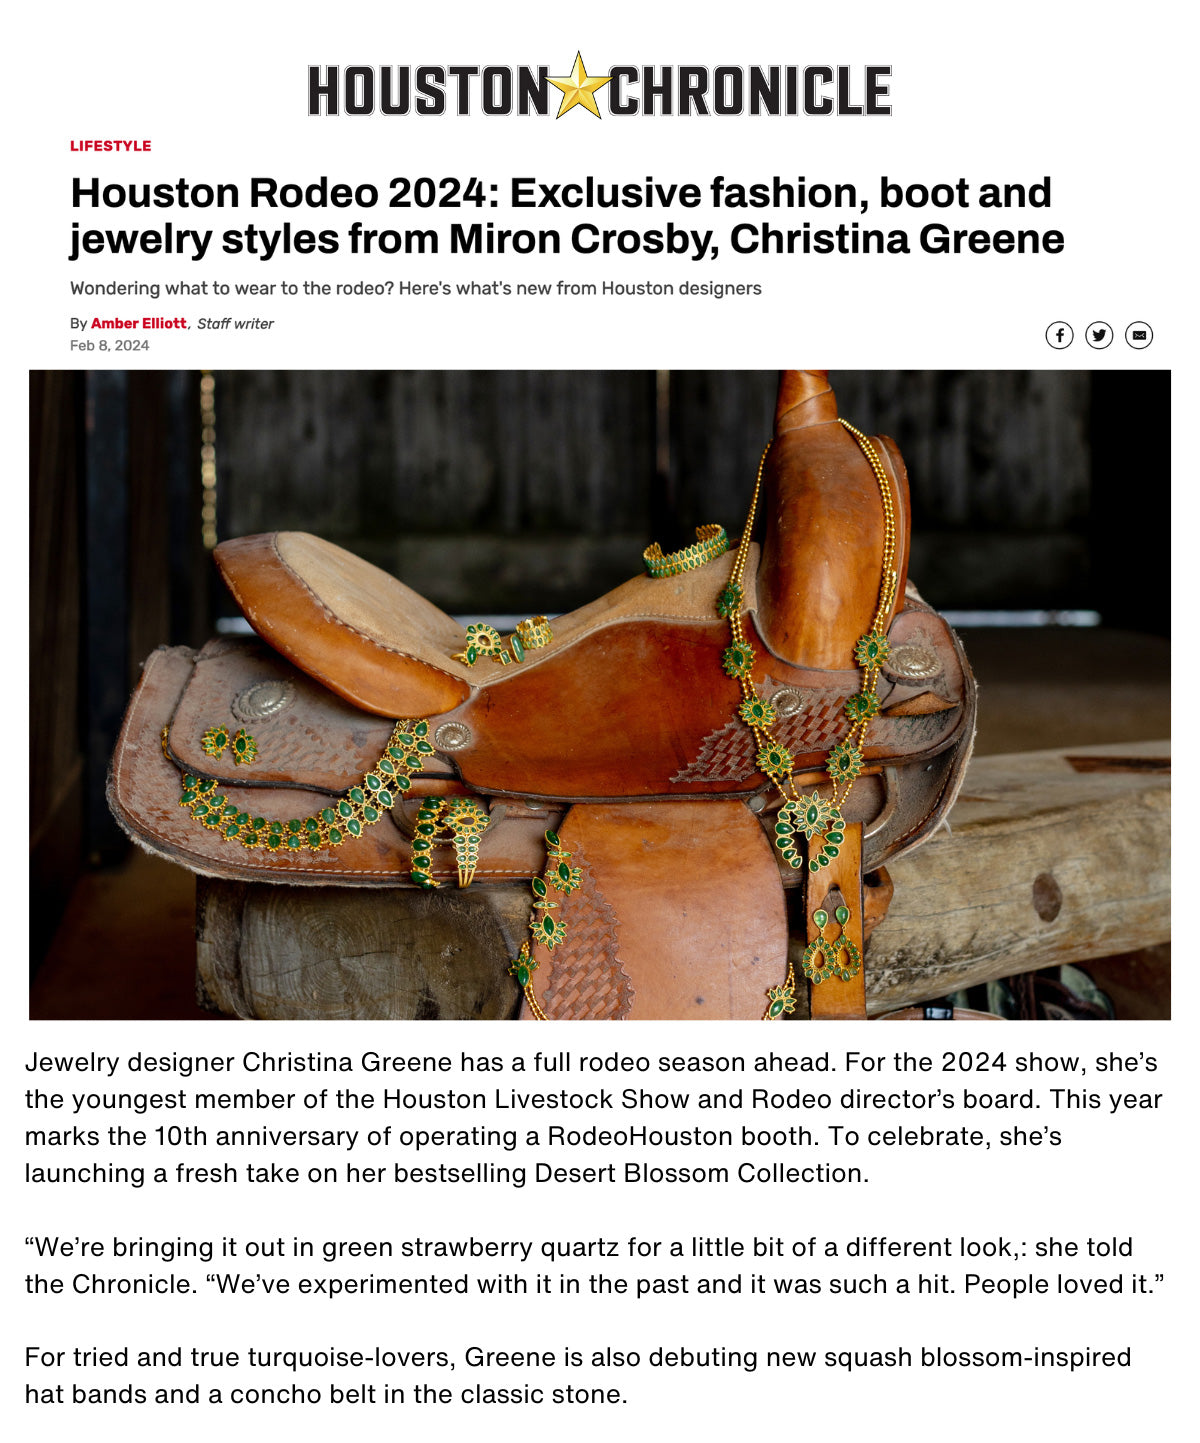 A preview of the Rodeo Fashion Article from the Houston Chronicle